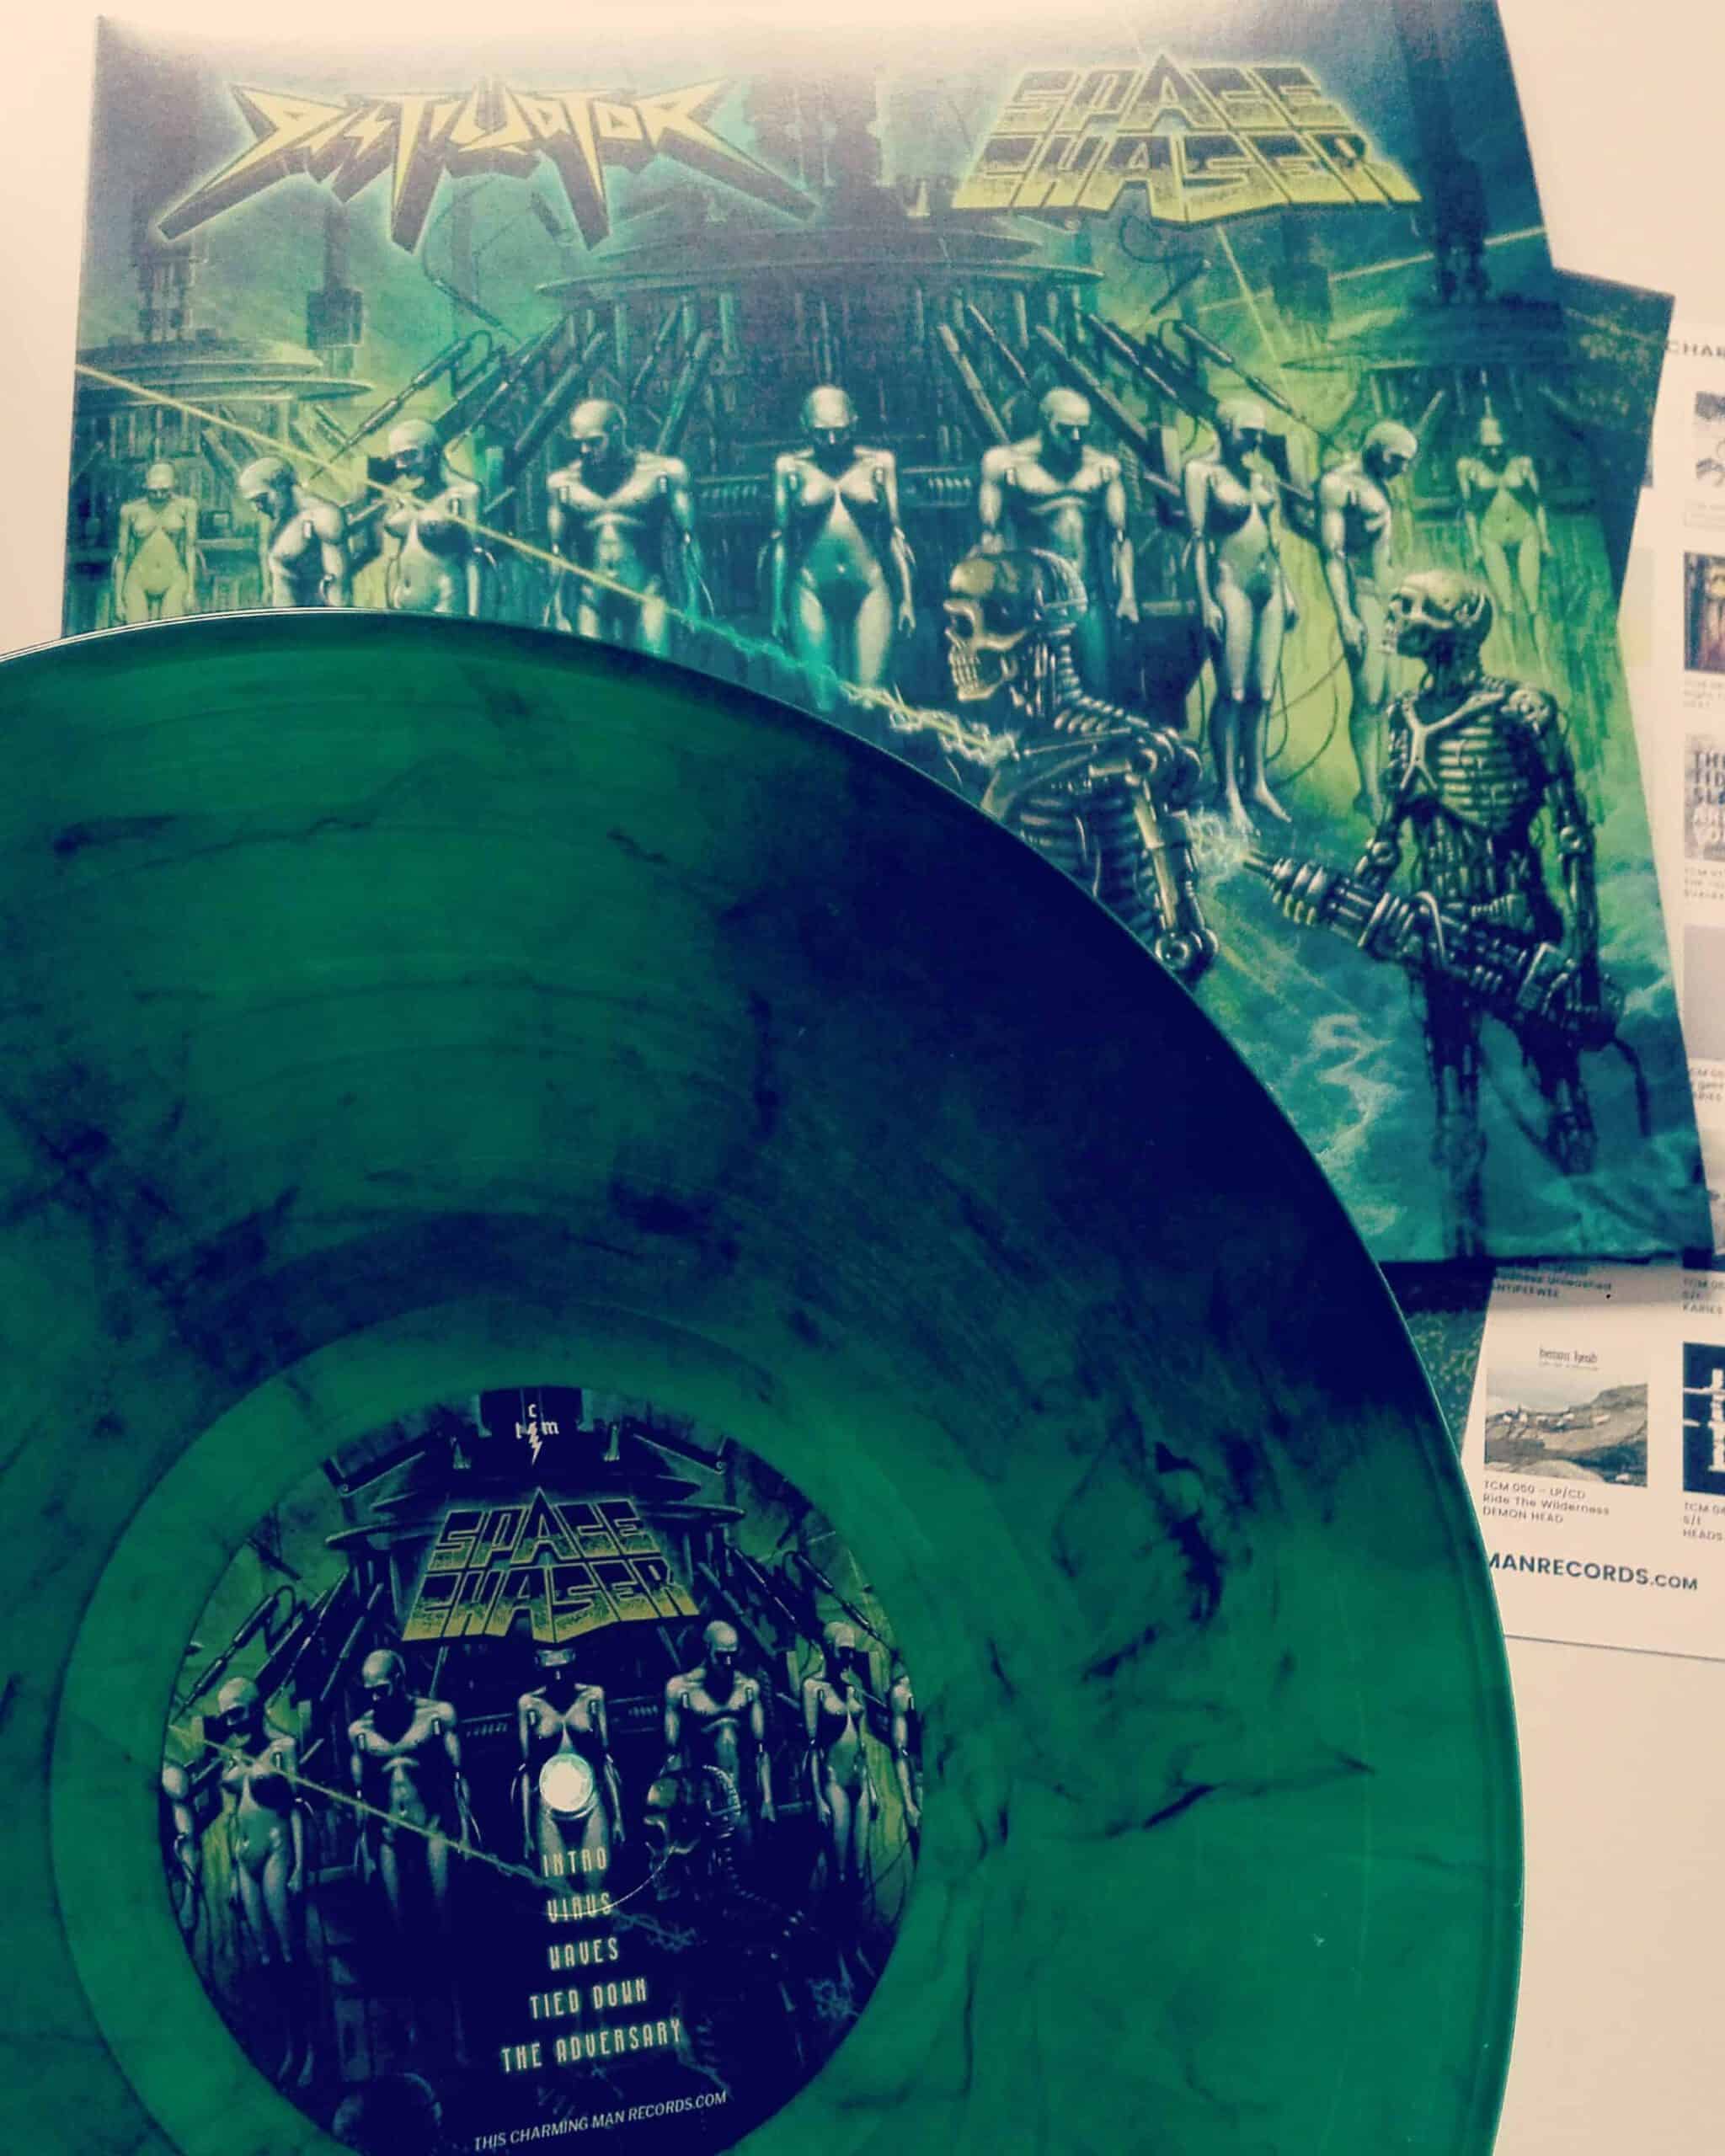 Space Chaser/Distillator - Split LP/CD Pressing Info: 1st press: 150x green black marbled (mailorder exclusive), 450x black 2nd press: 500 copies clear  